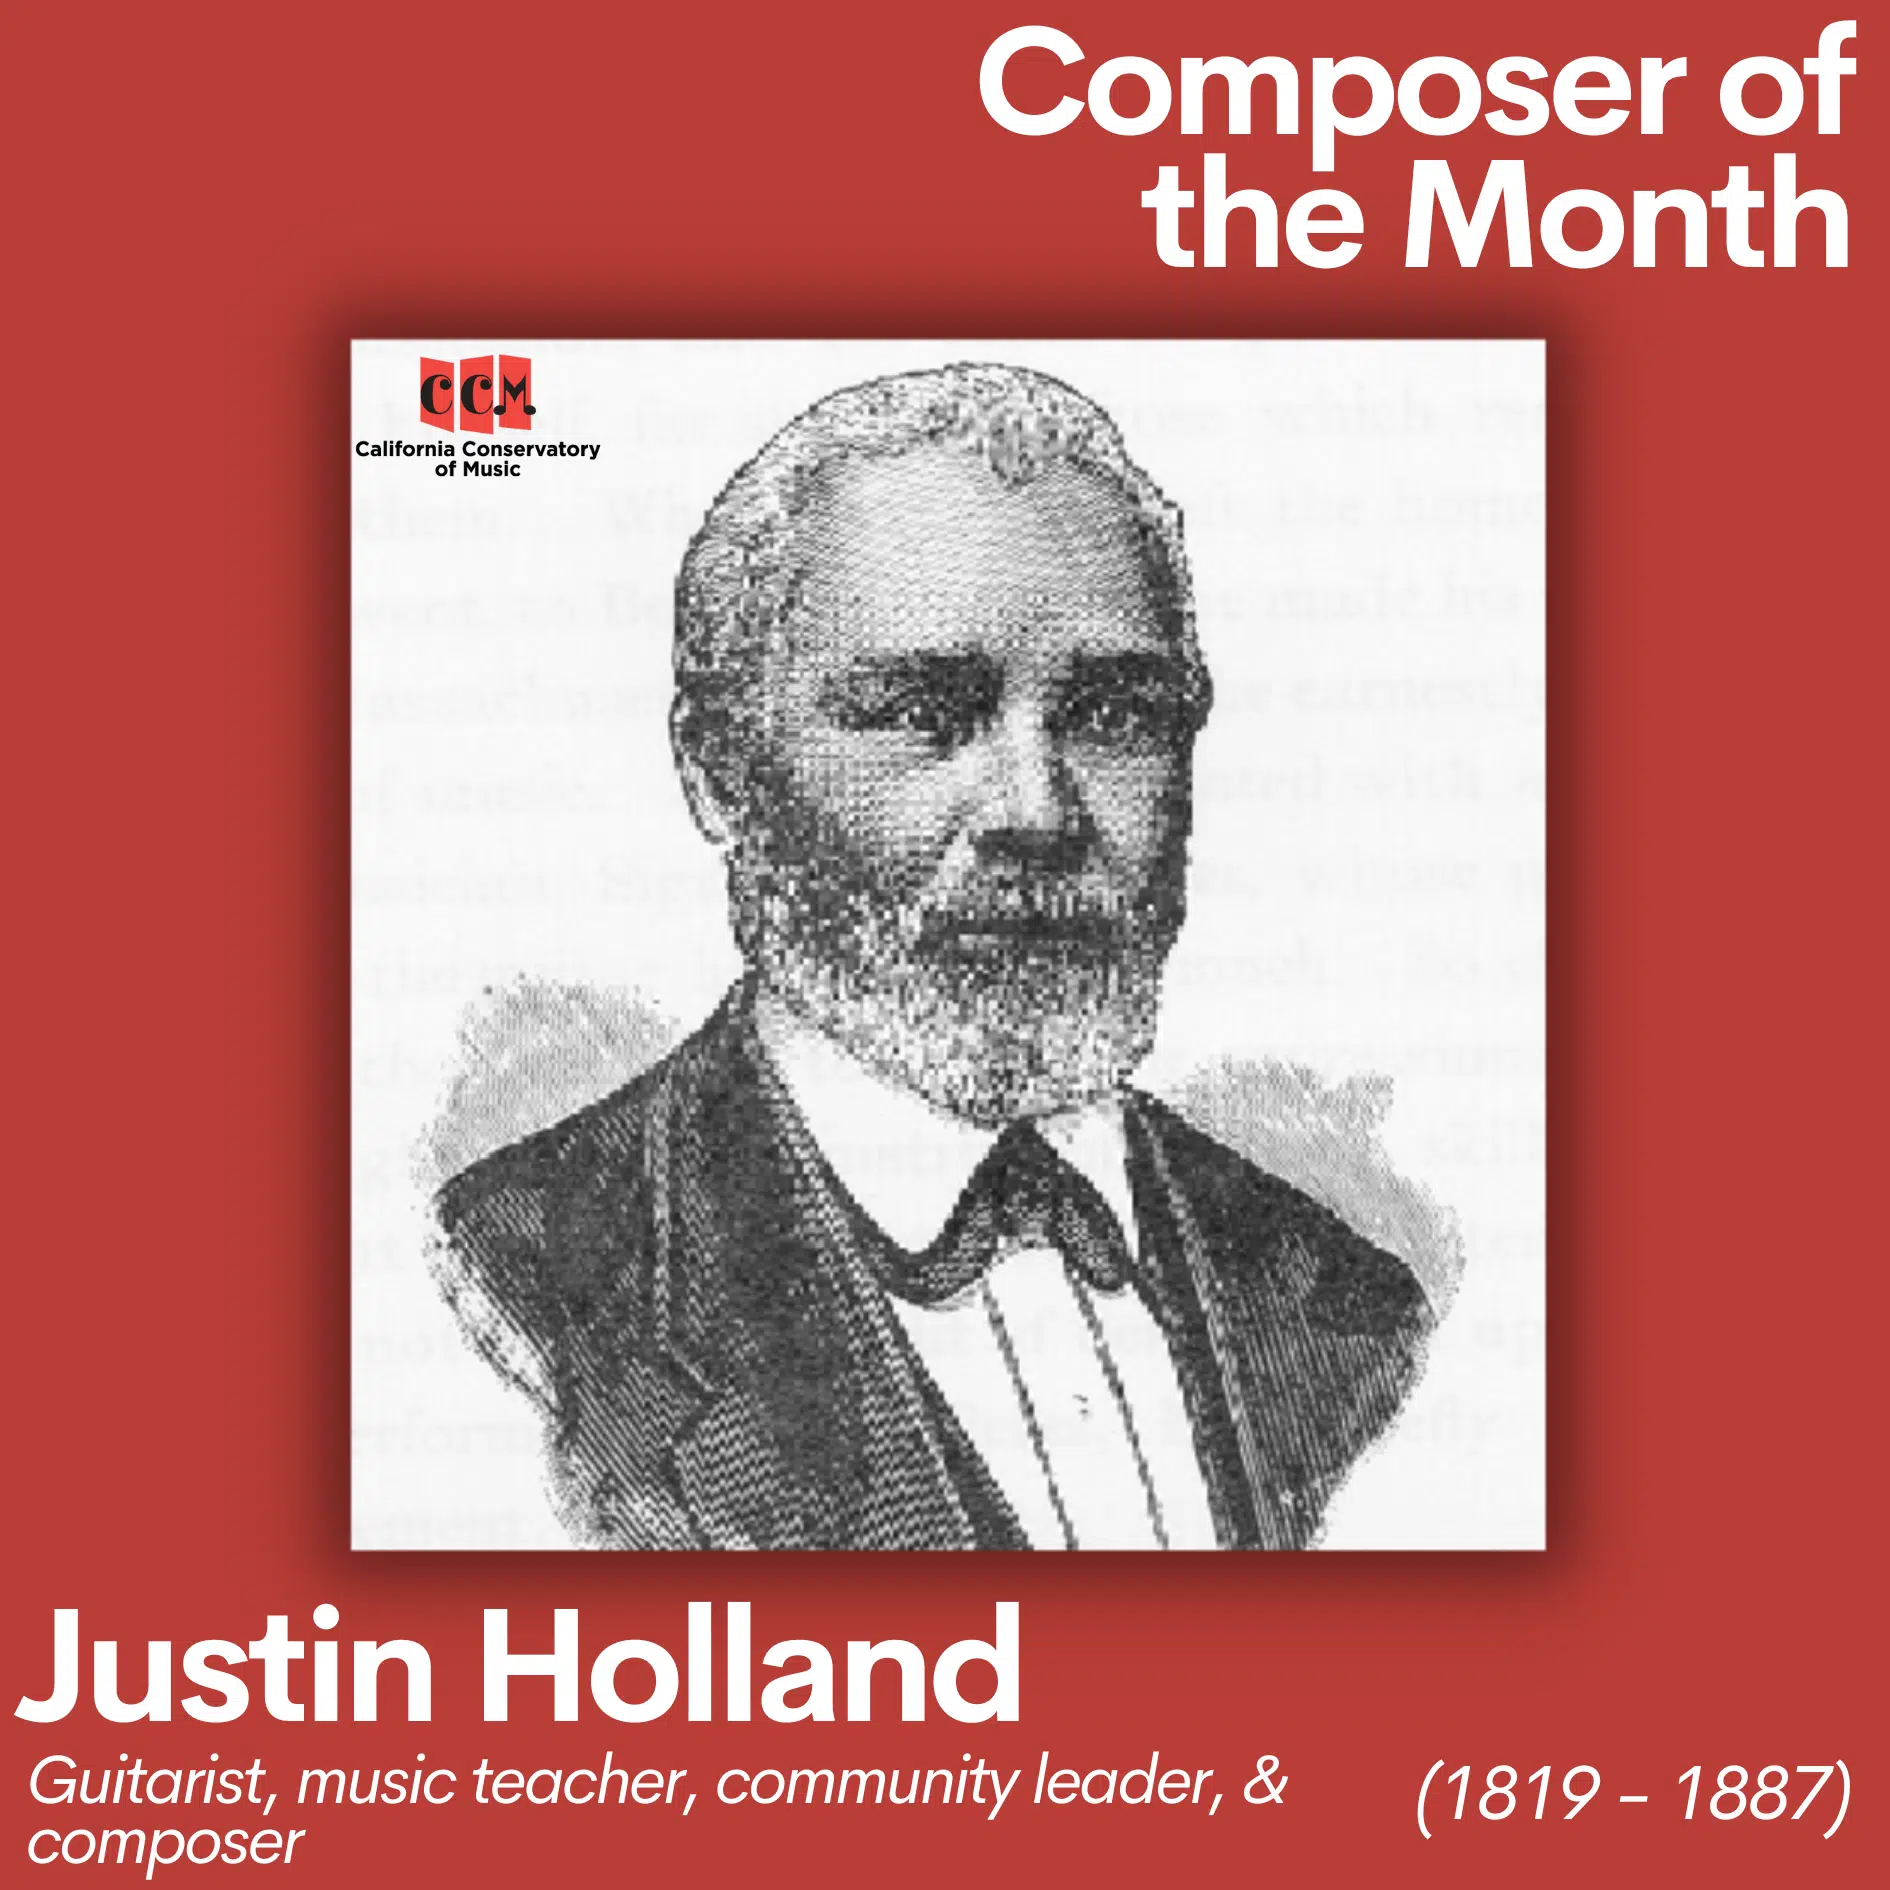 Justin Holland, the February 2023 Composer of the Month